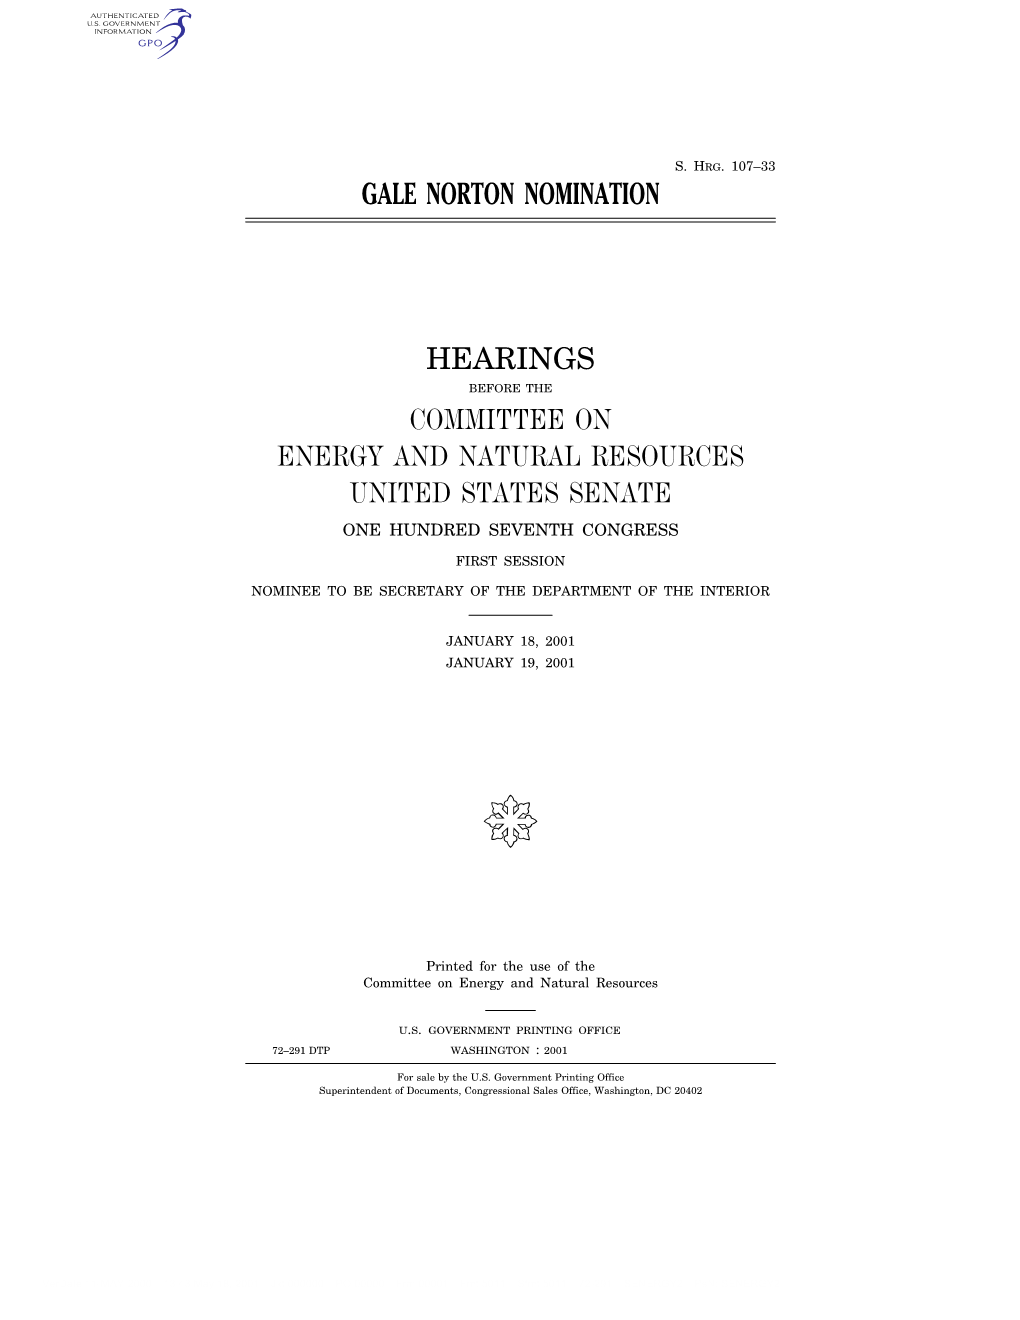 Gale Norton Nomination Hearings Committee on Energy and Natural Resources United States Senate